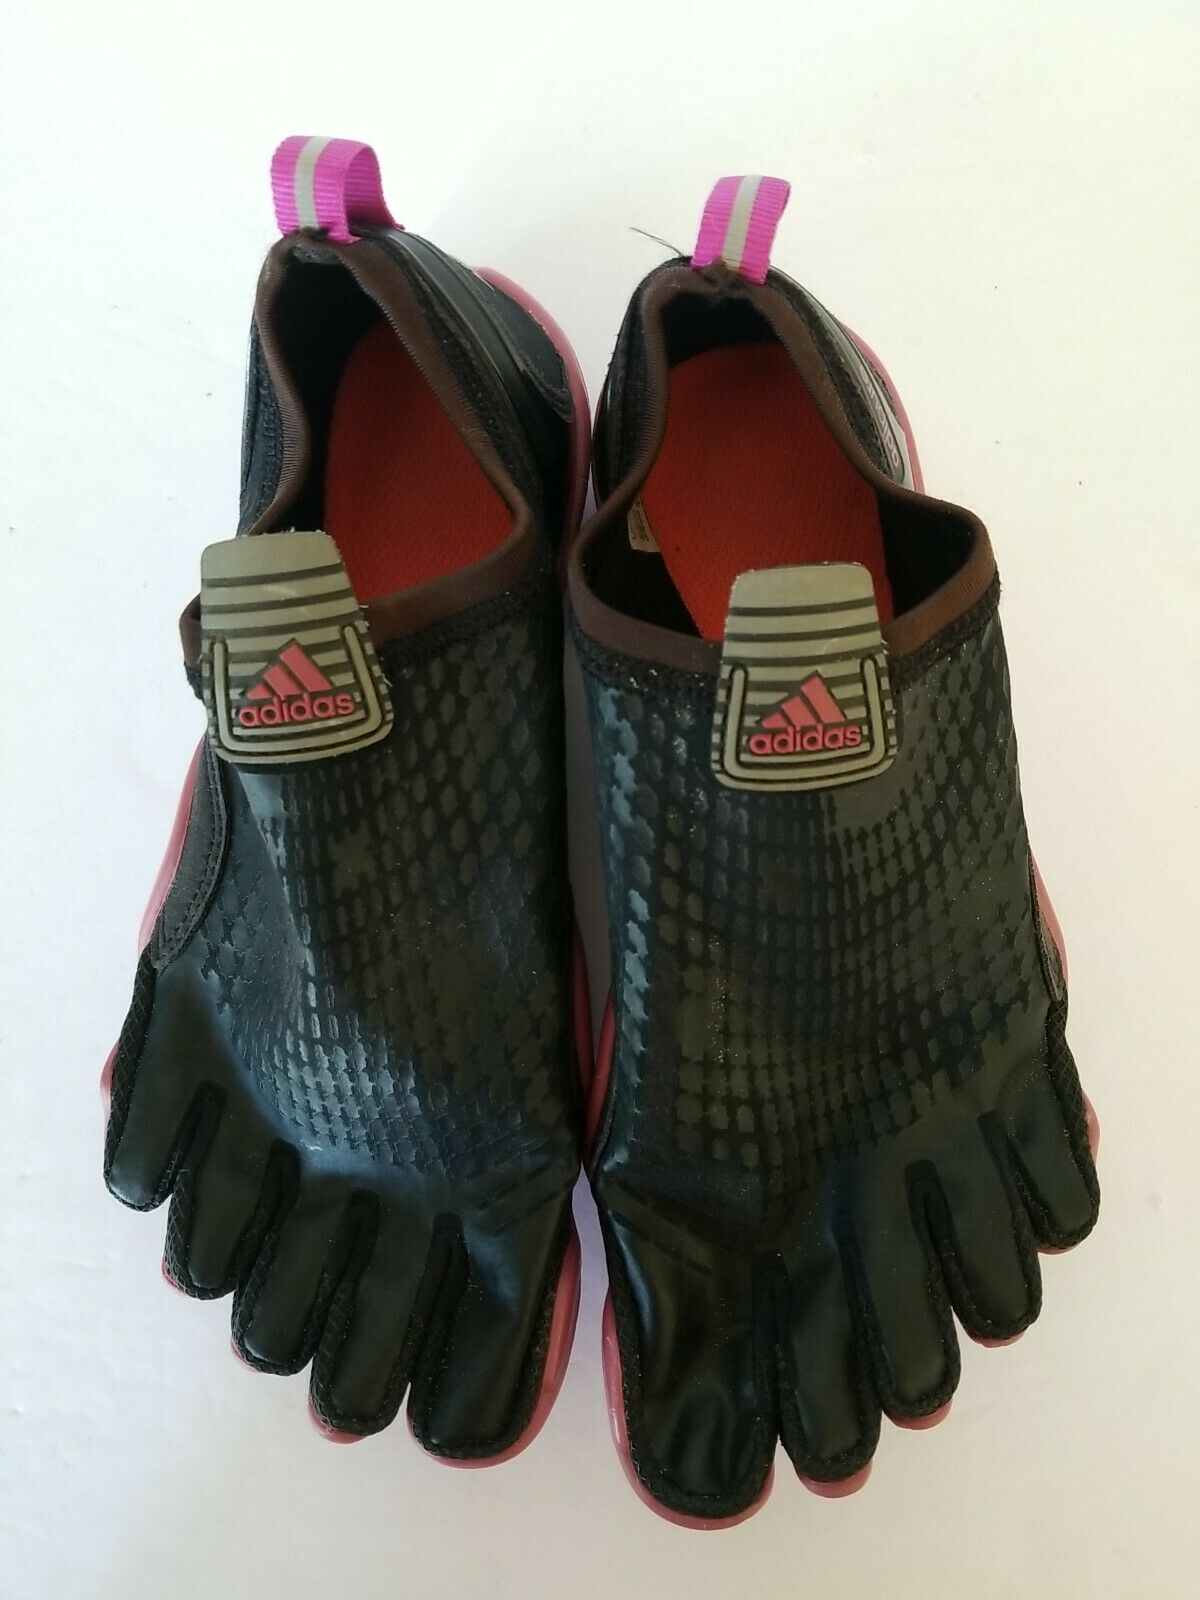 Adidas Womens Adipure Five Finger Toe Barefoot Shoes Trainer Sz 6.5 Black Pink